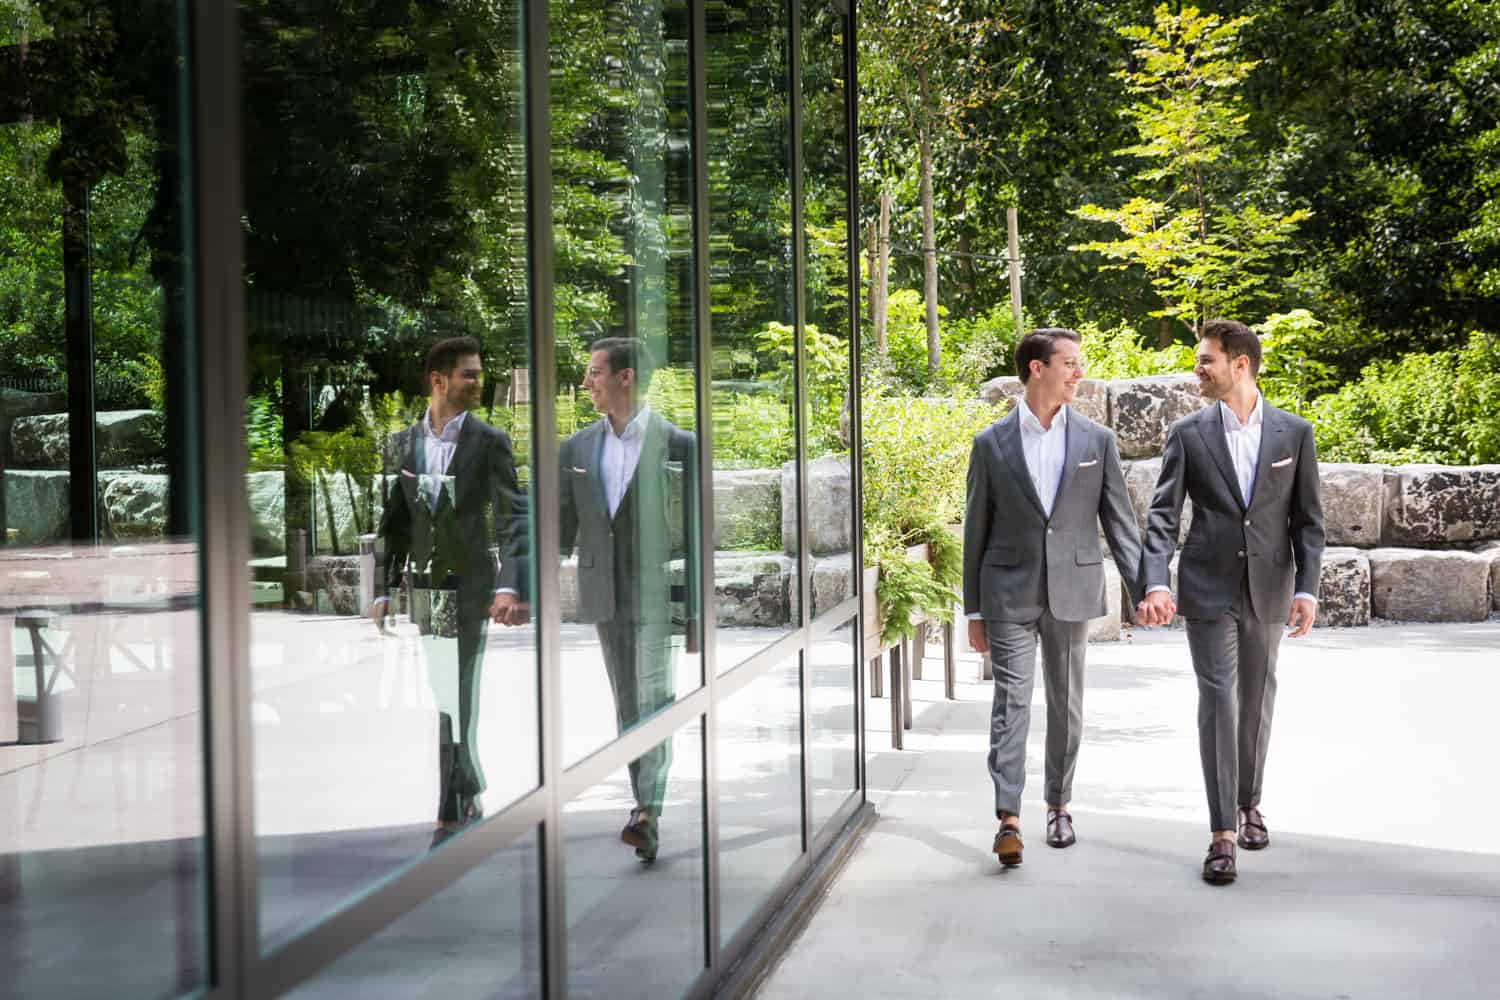 Greenpoint Loft wedding photos of two grooms walking hand-in-hand reflected in glass